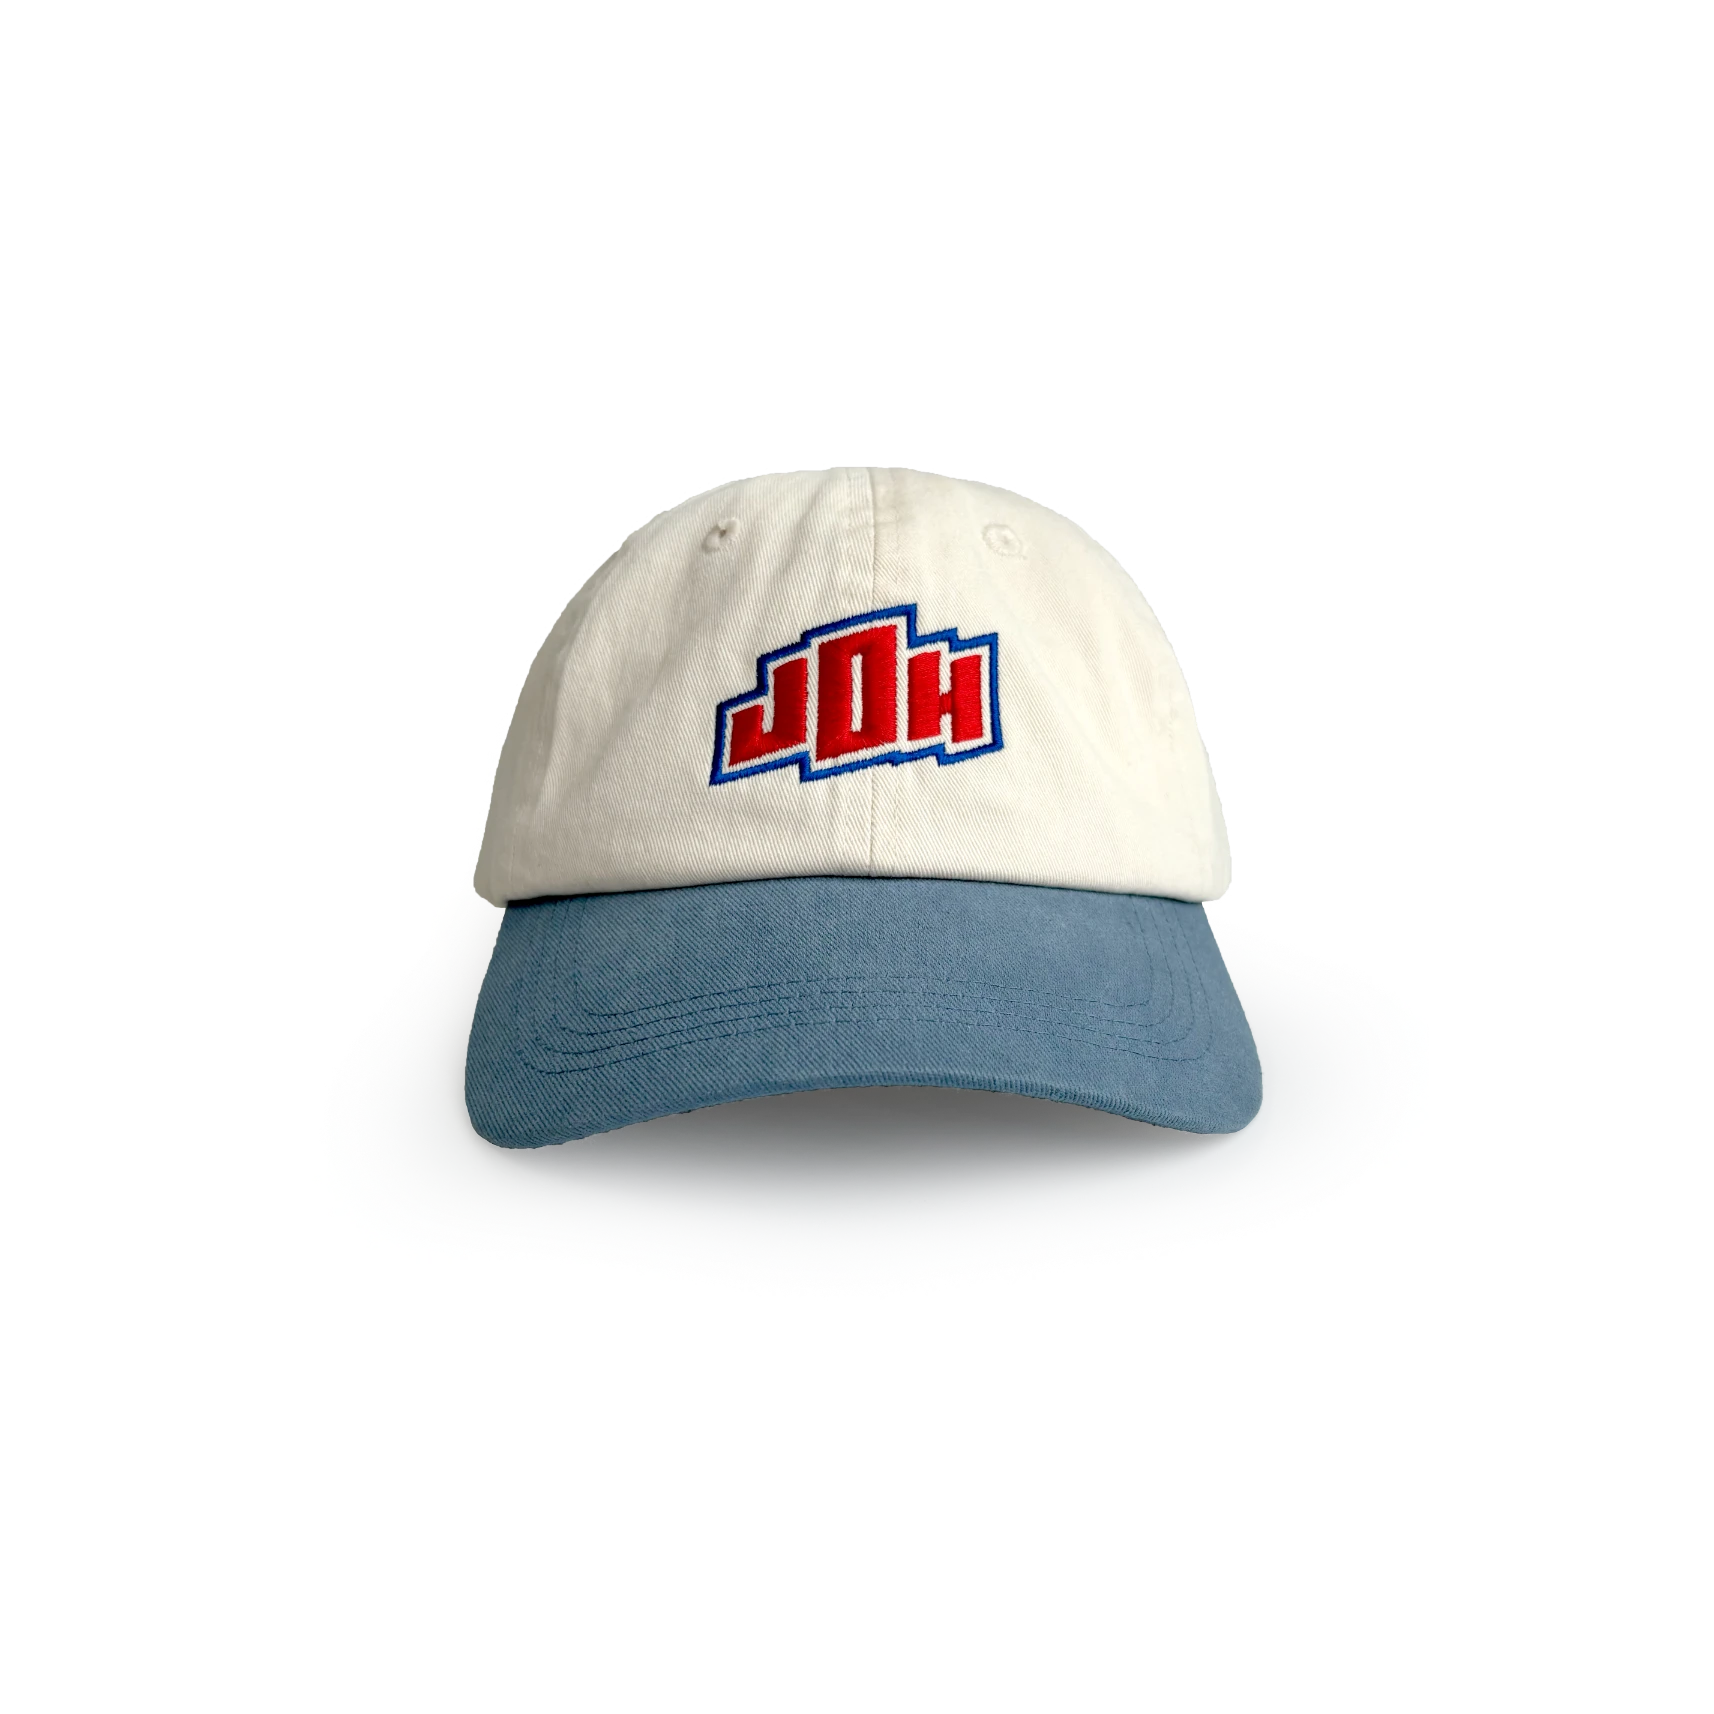 joh-dad_cap_cleaning_logo_FRONT